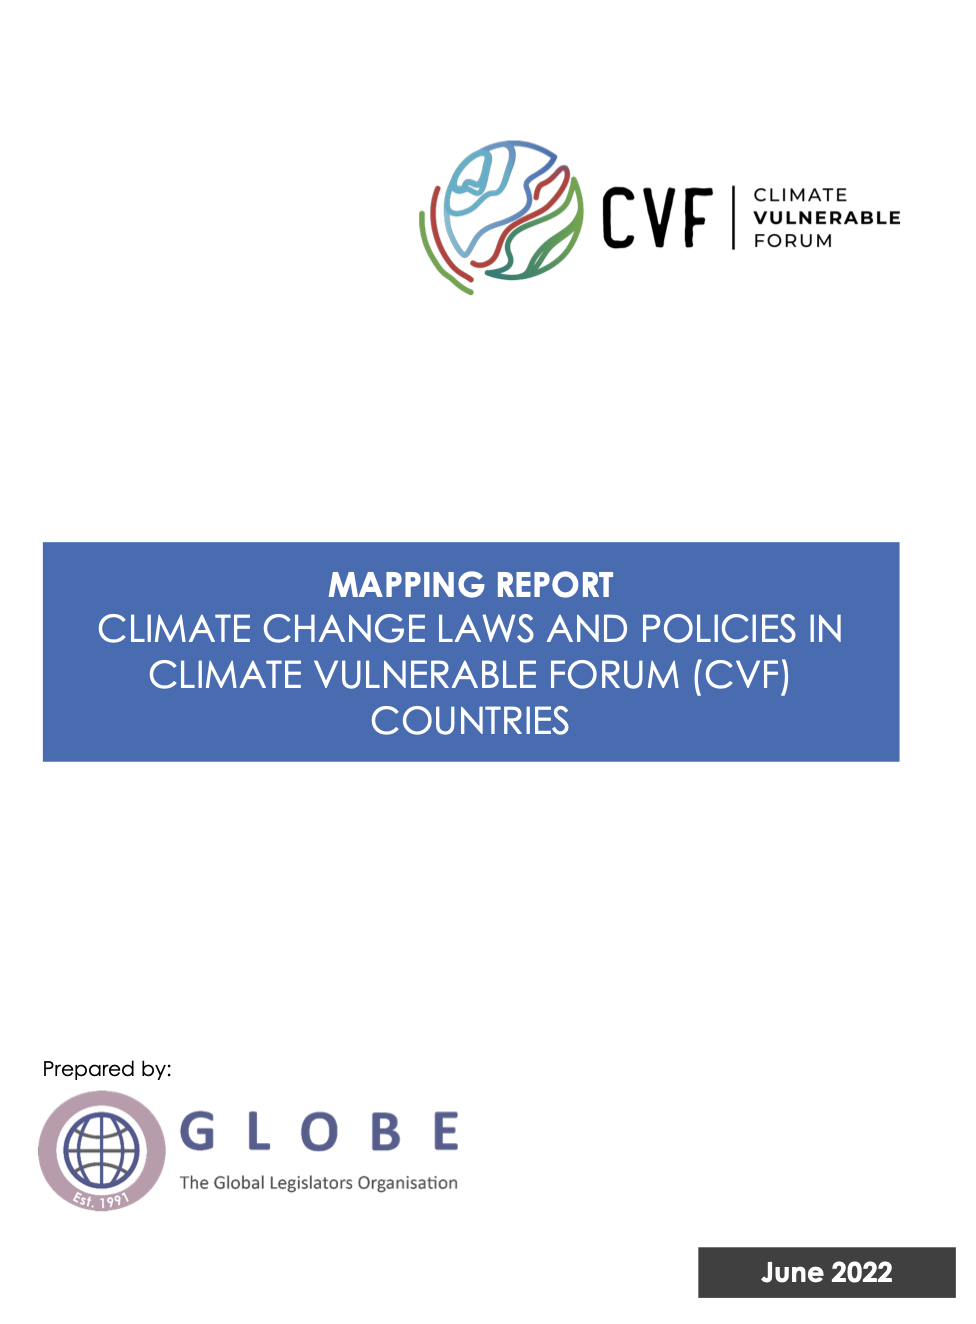  Mapping Report on Climate Change Laws and Policies in Climate Vulnerable Forum (CVF) Countries